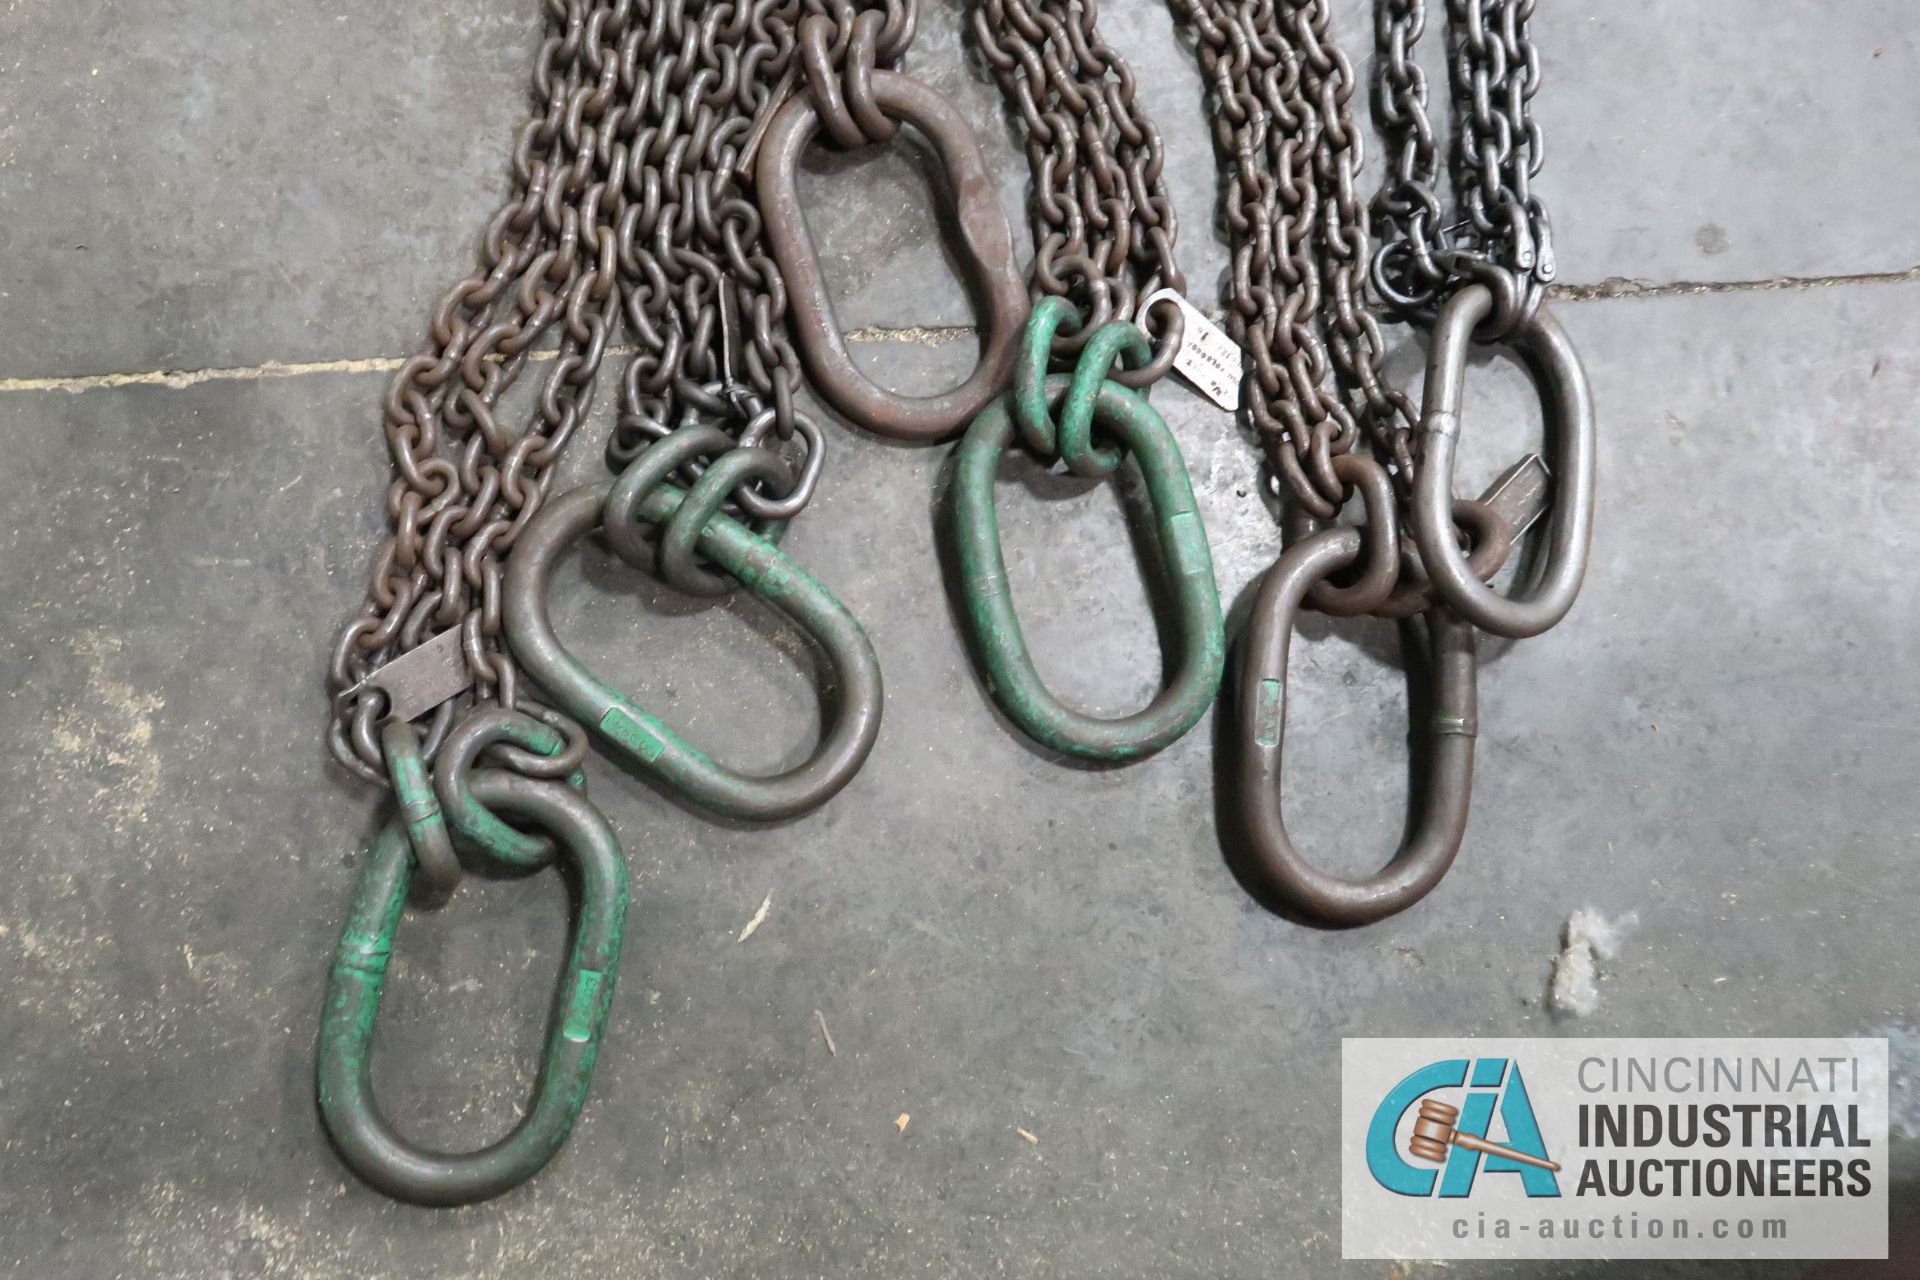 10 FT. 3-HOOK CRANE CHAINS - Image 3 of 3